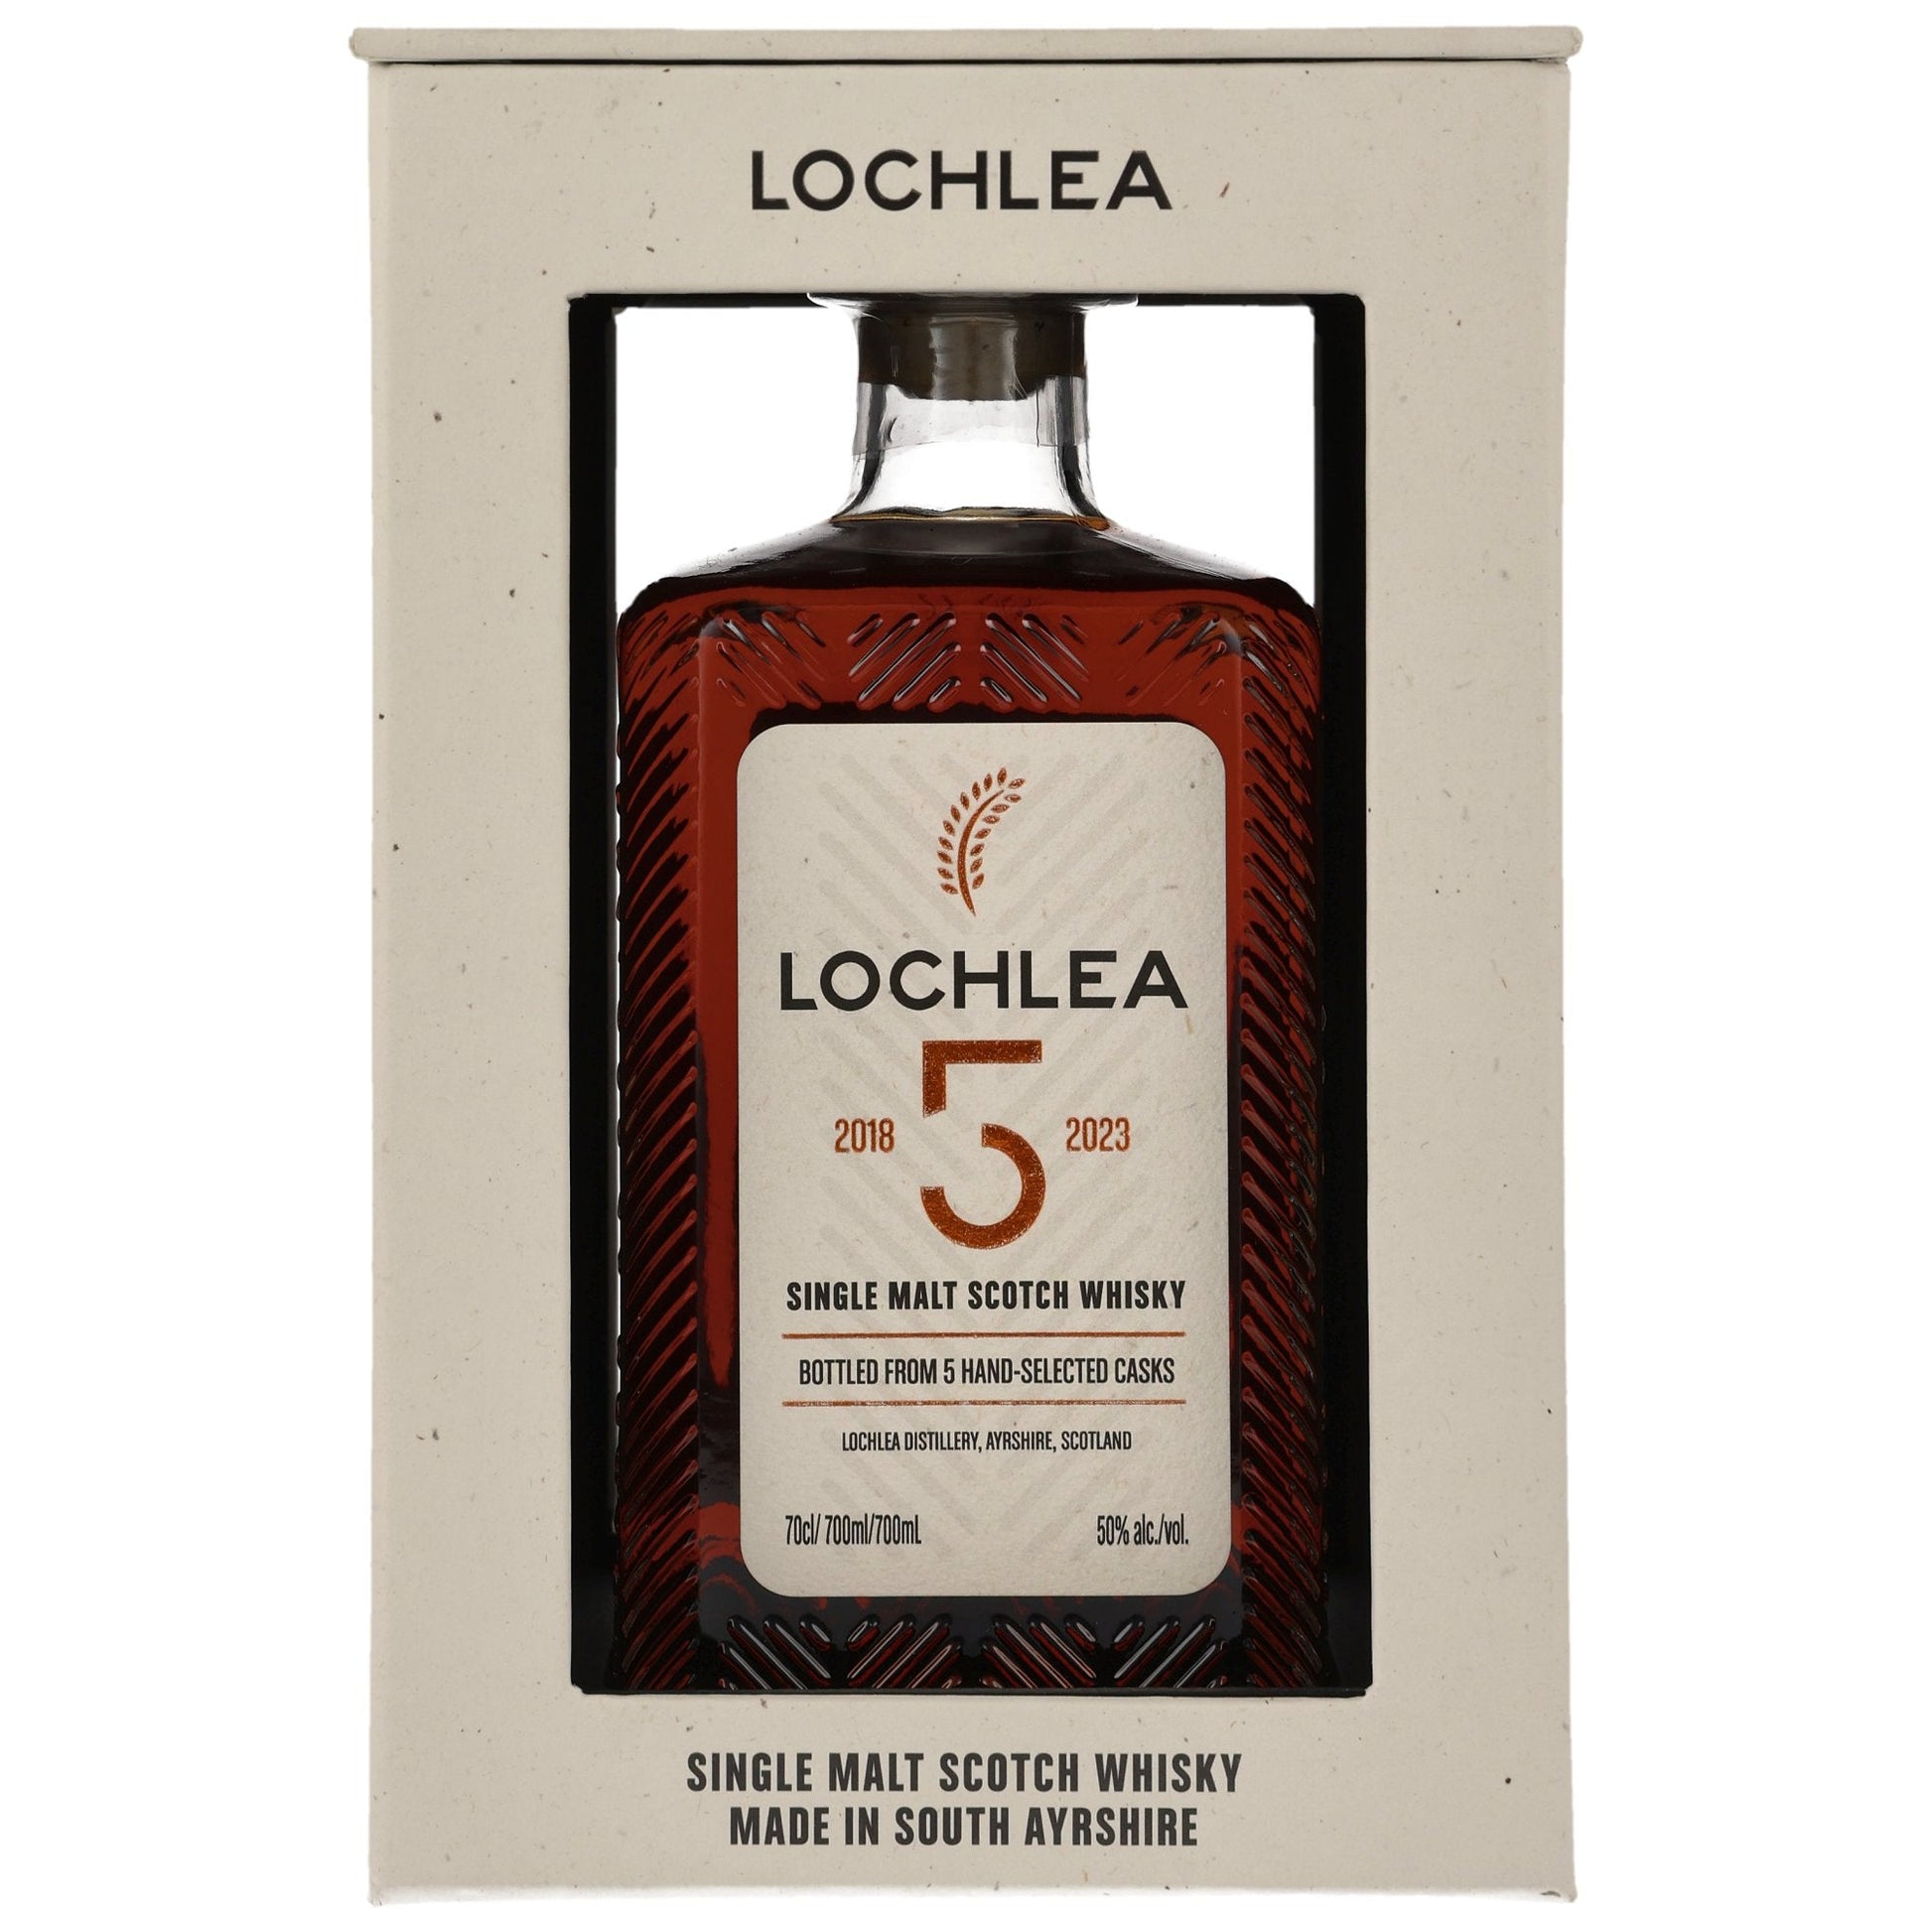 Lochlea | 5 Jahre | 2018/2023 | 50%GET A BOTTLE